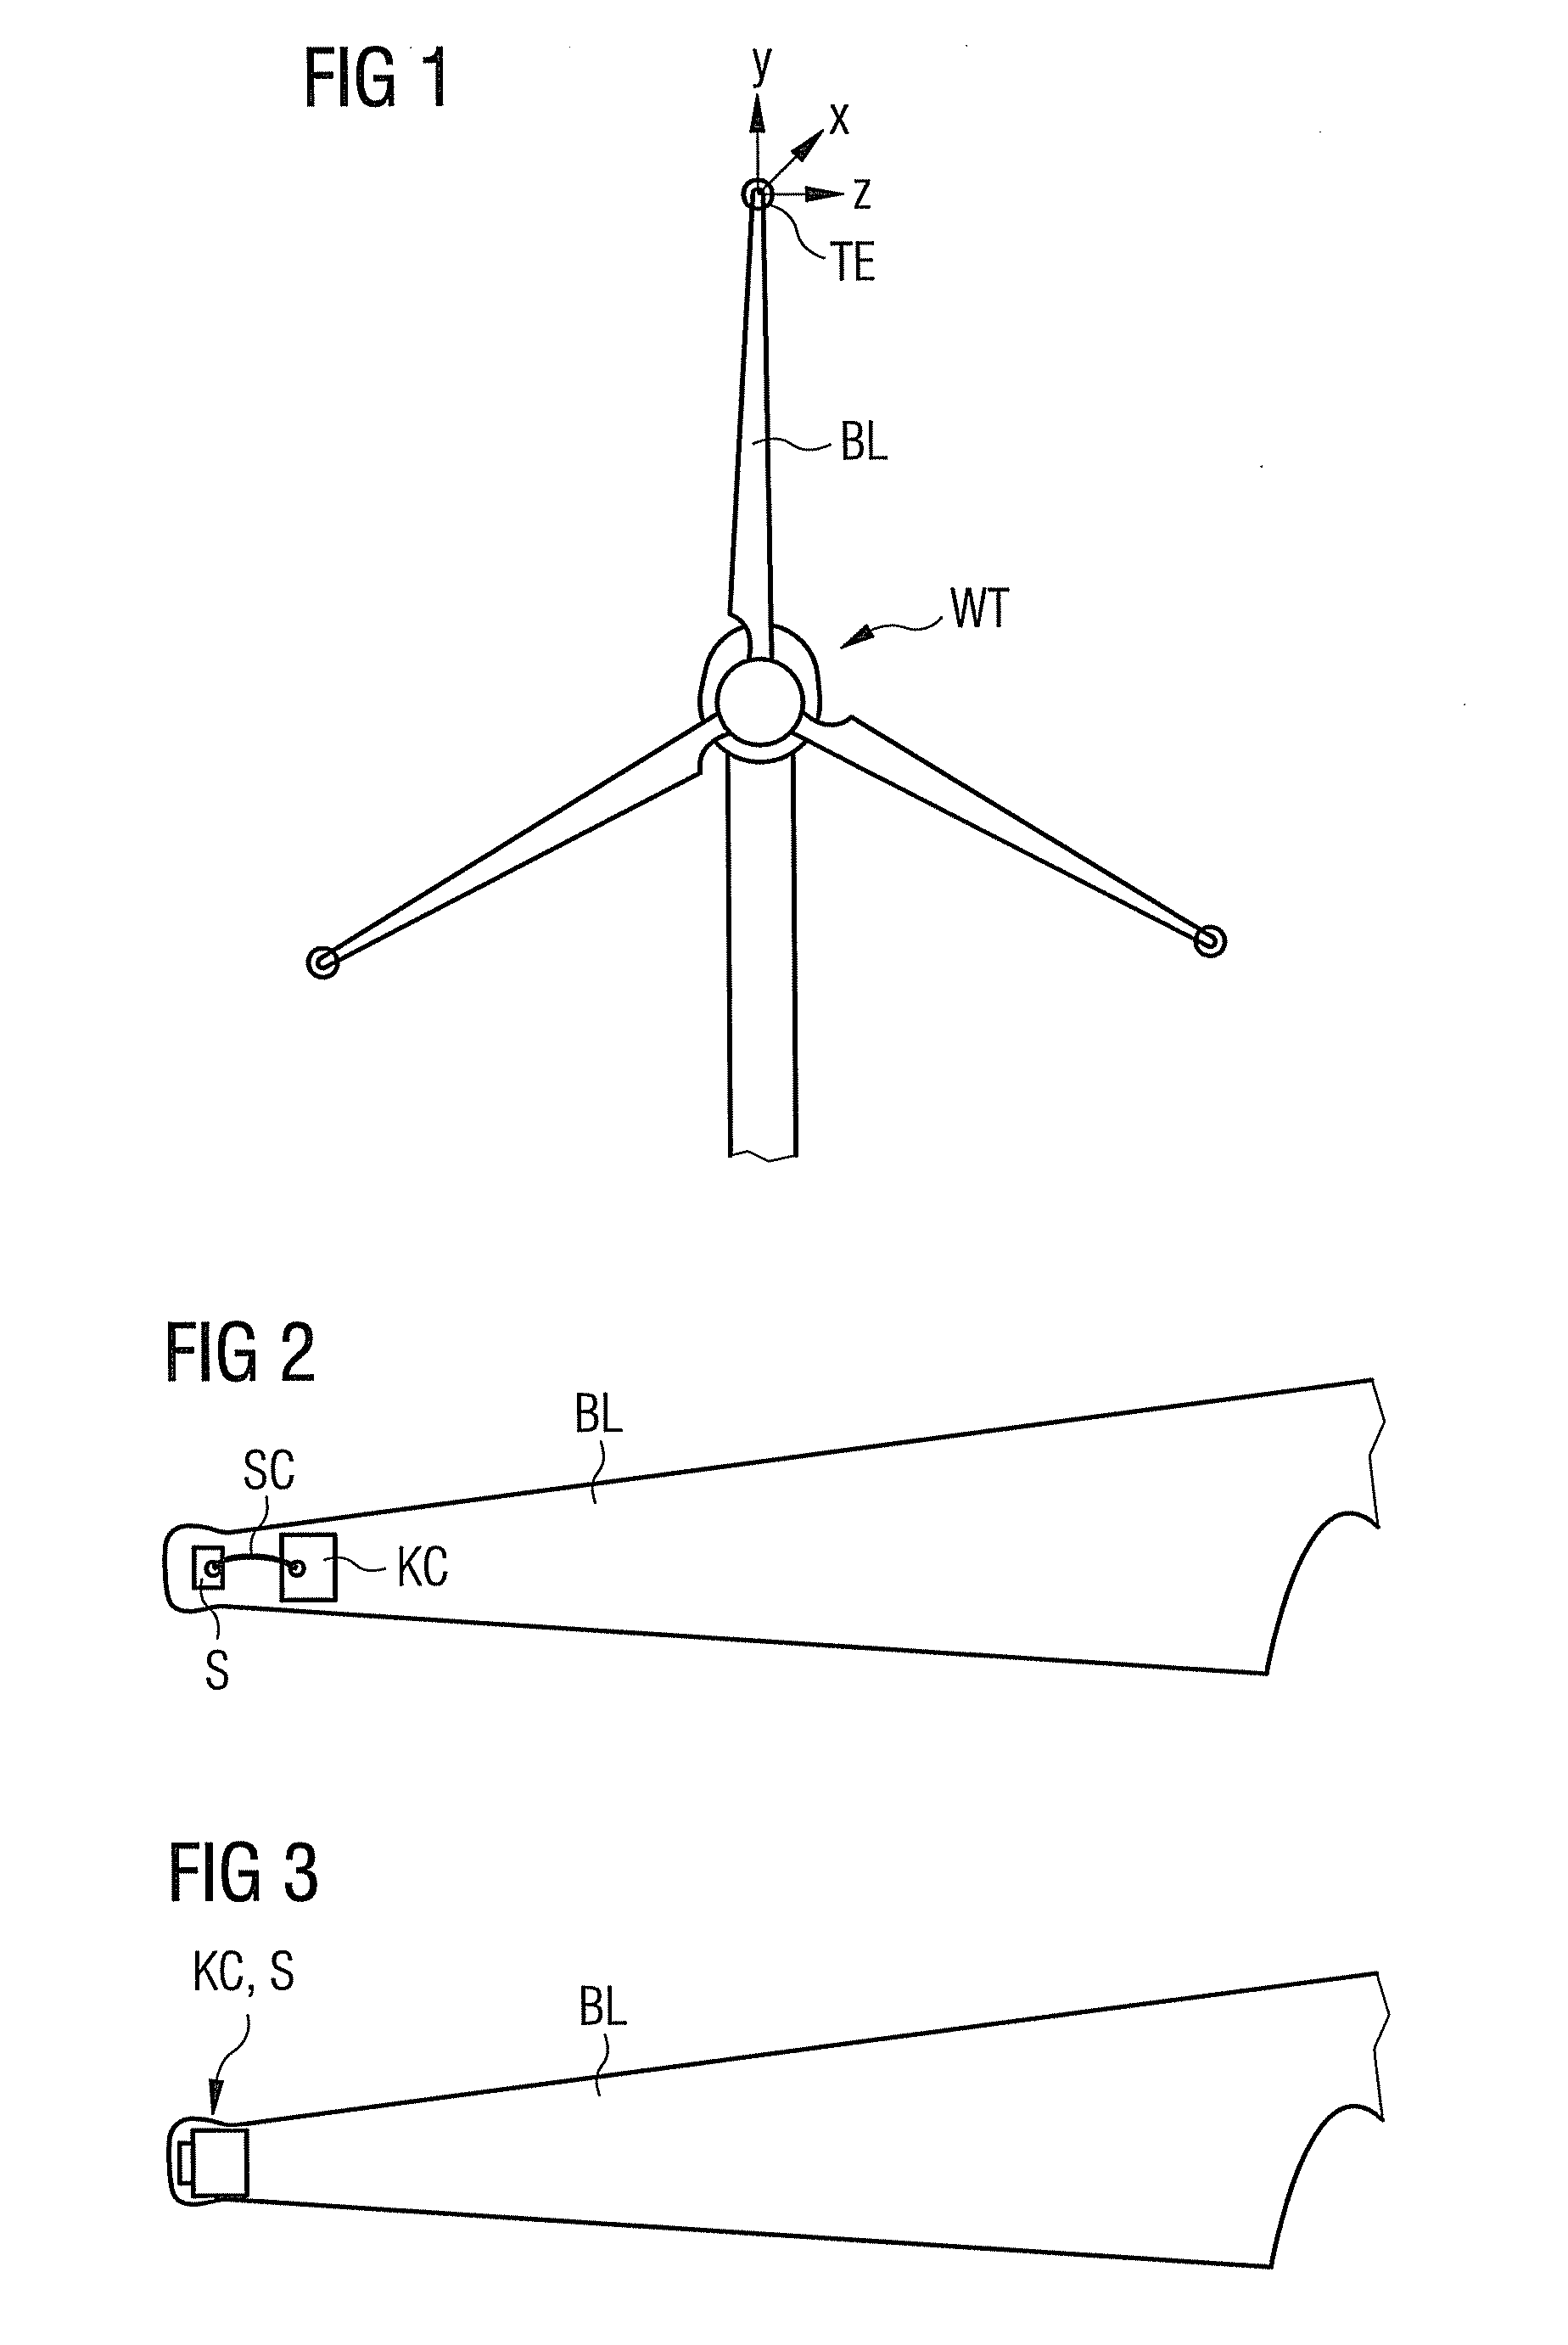 Arrangement to supply a sensor with electrical power